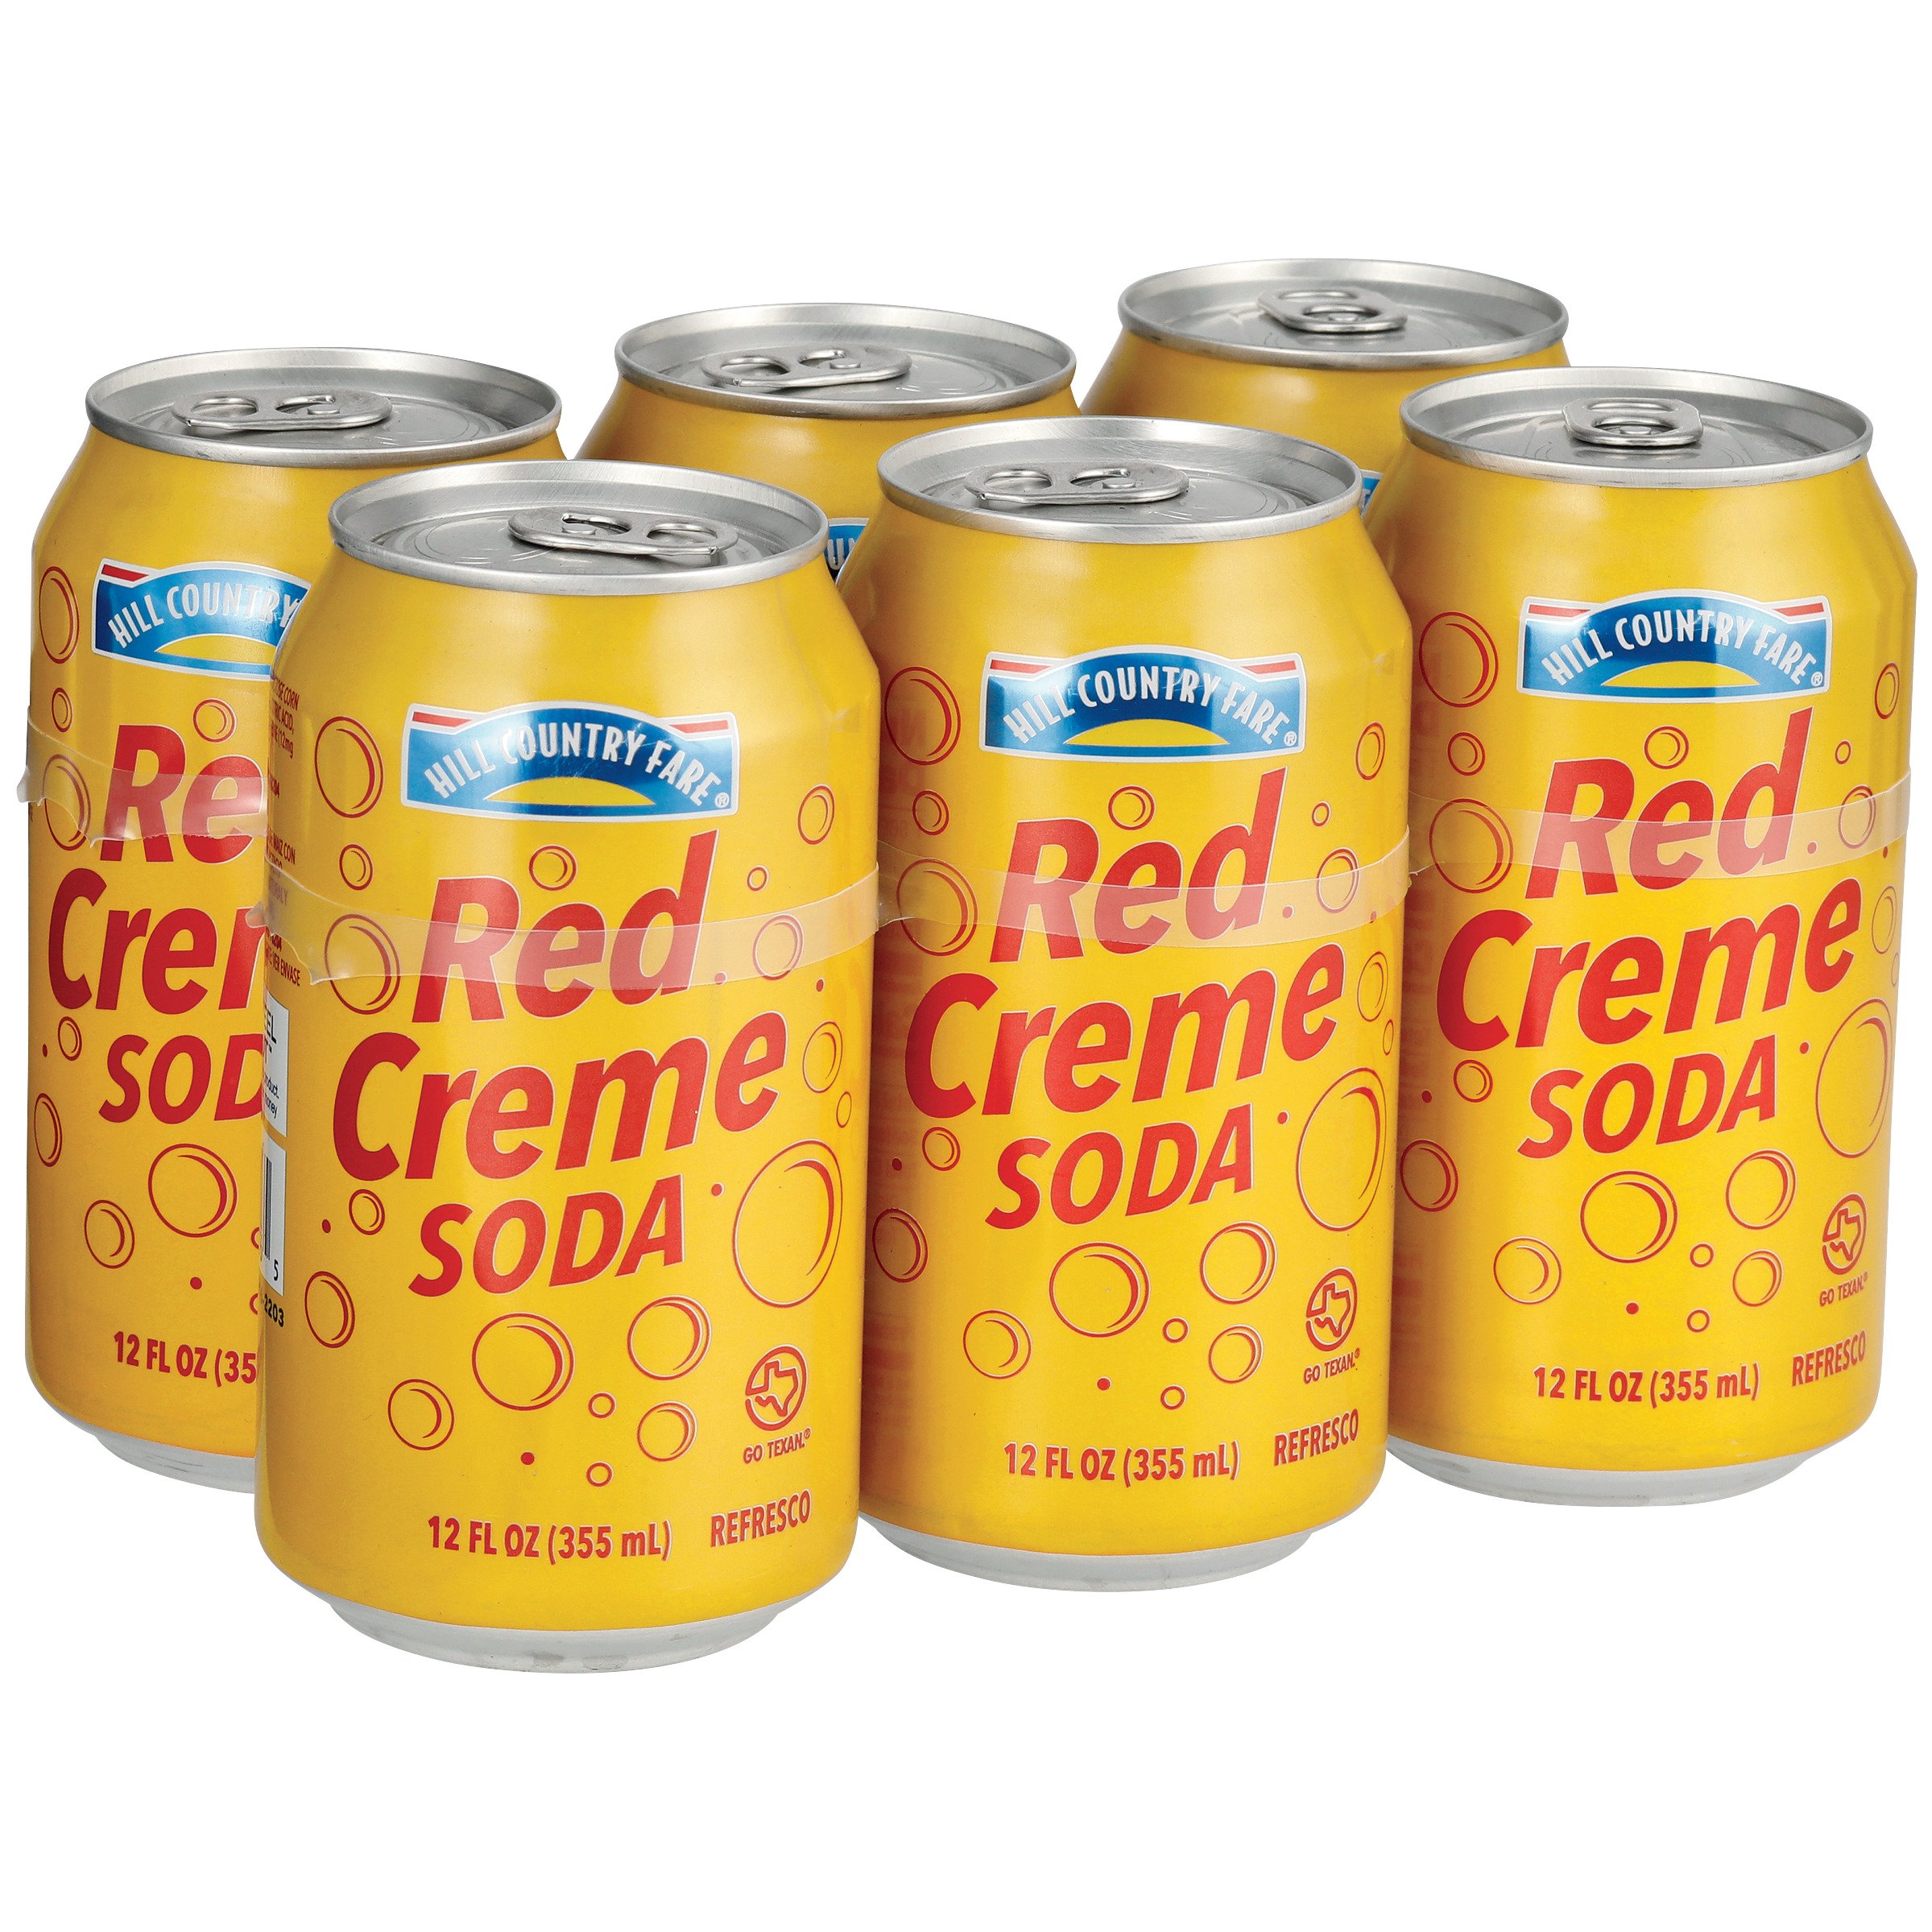 Hill Country Red Creme Soda 12 oz Cans - Shop Soda at H-E-B